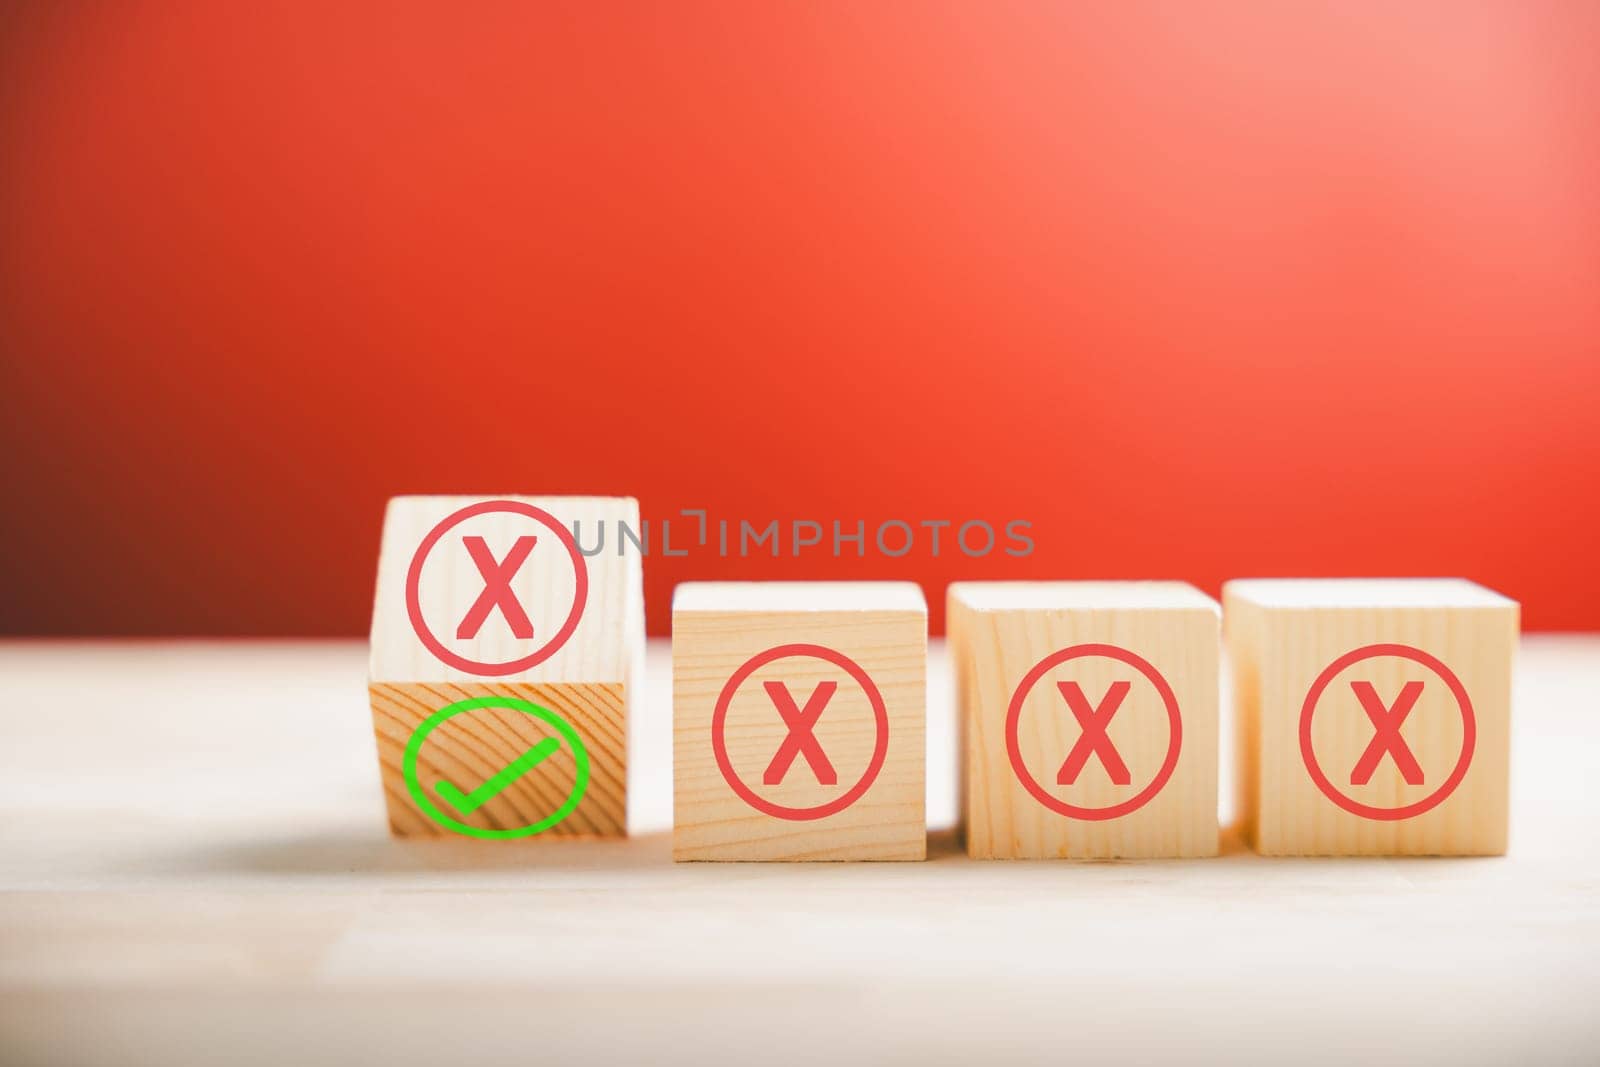 Business solution and decision-making concepts. Wood sphere flips from red wrong symbols to green checkmark symbolizing change from wrong to right on wooden cubes. Think With Yes Or No Choice.